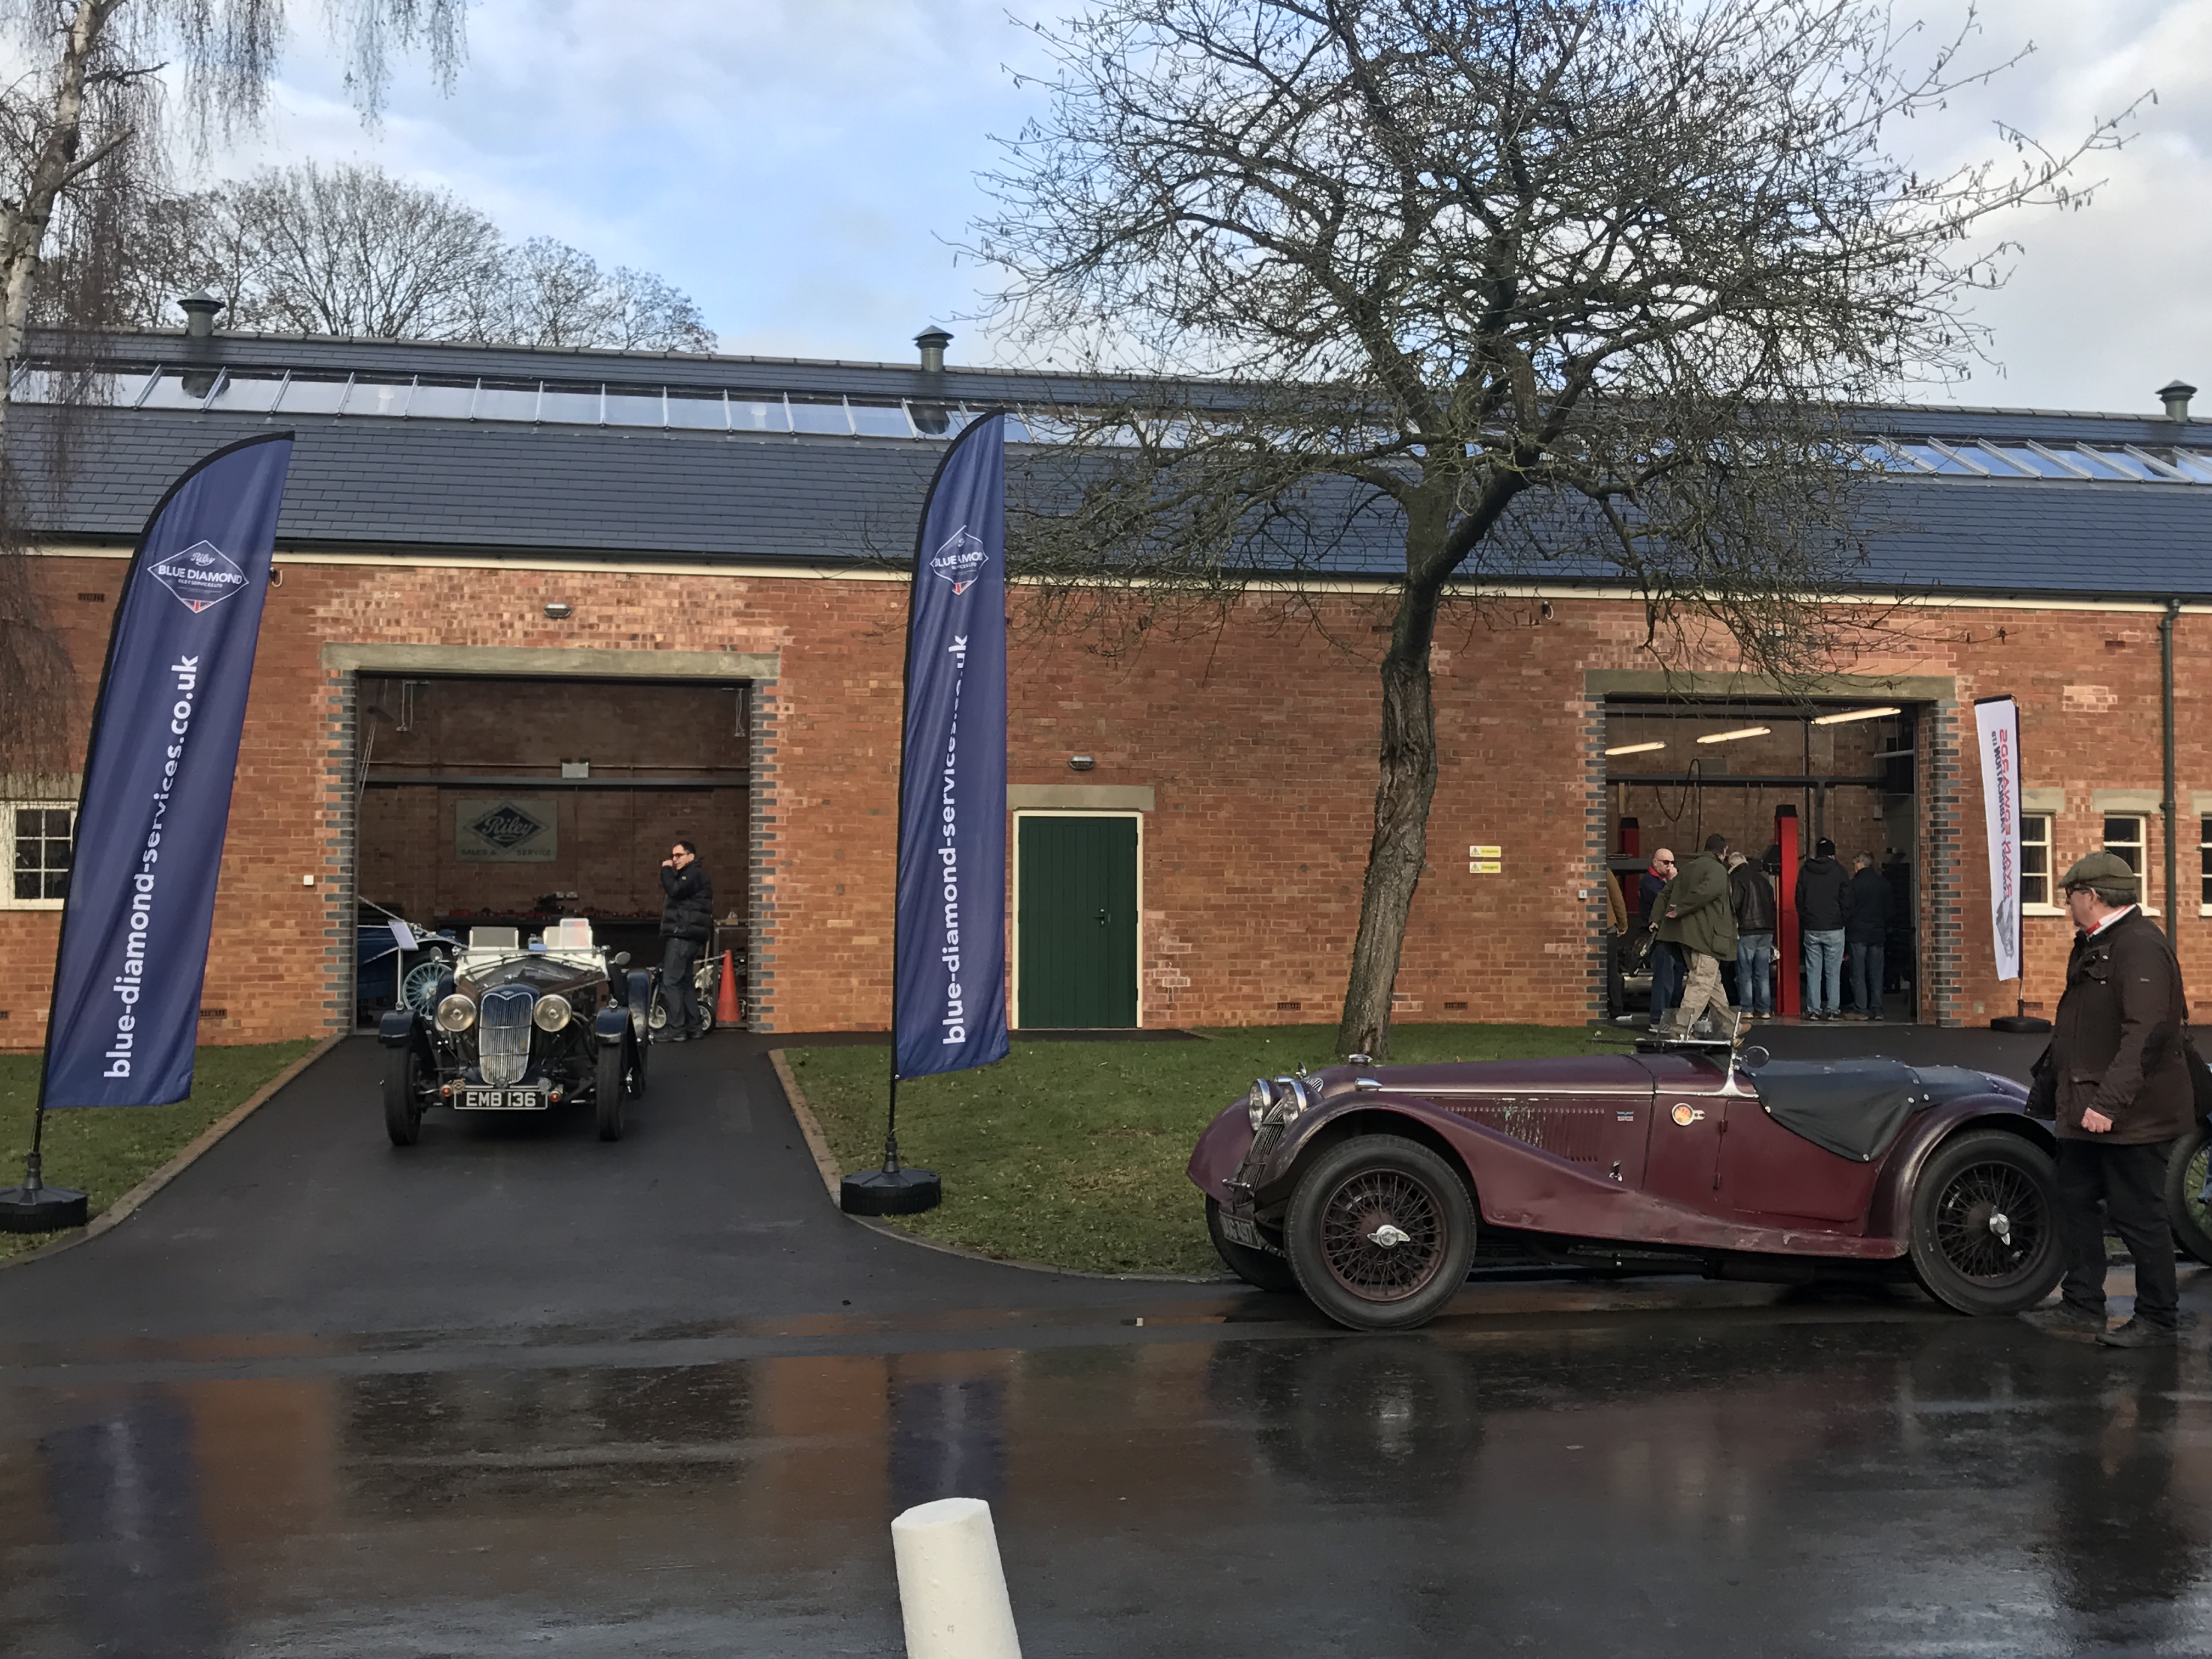 Bicester Sunday scramble January 8 2017 - Page 2 - Events/Meetings/Travel - PistonHeads